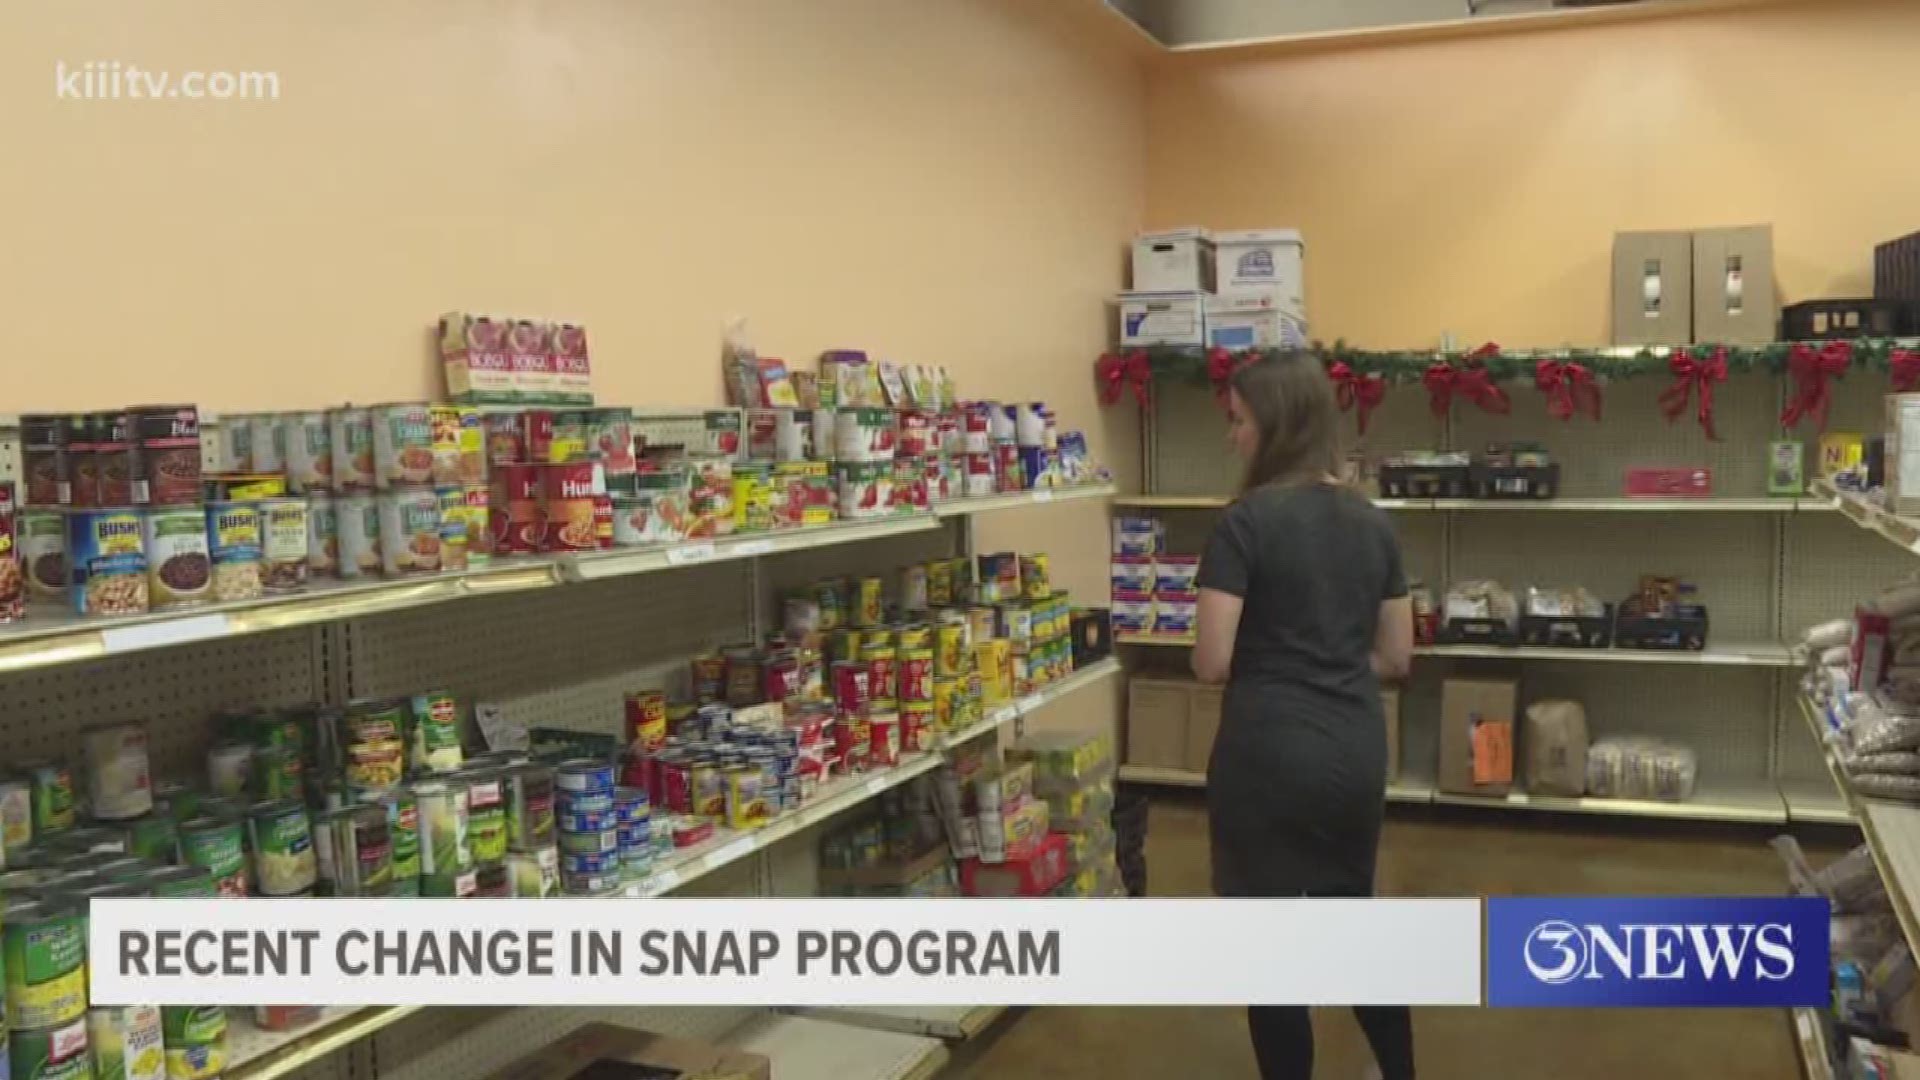 Although food stamps are not used at the Coastal Bend Food Bank, they do assist in filling out the SNAP program application.